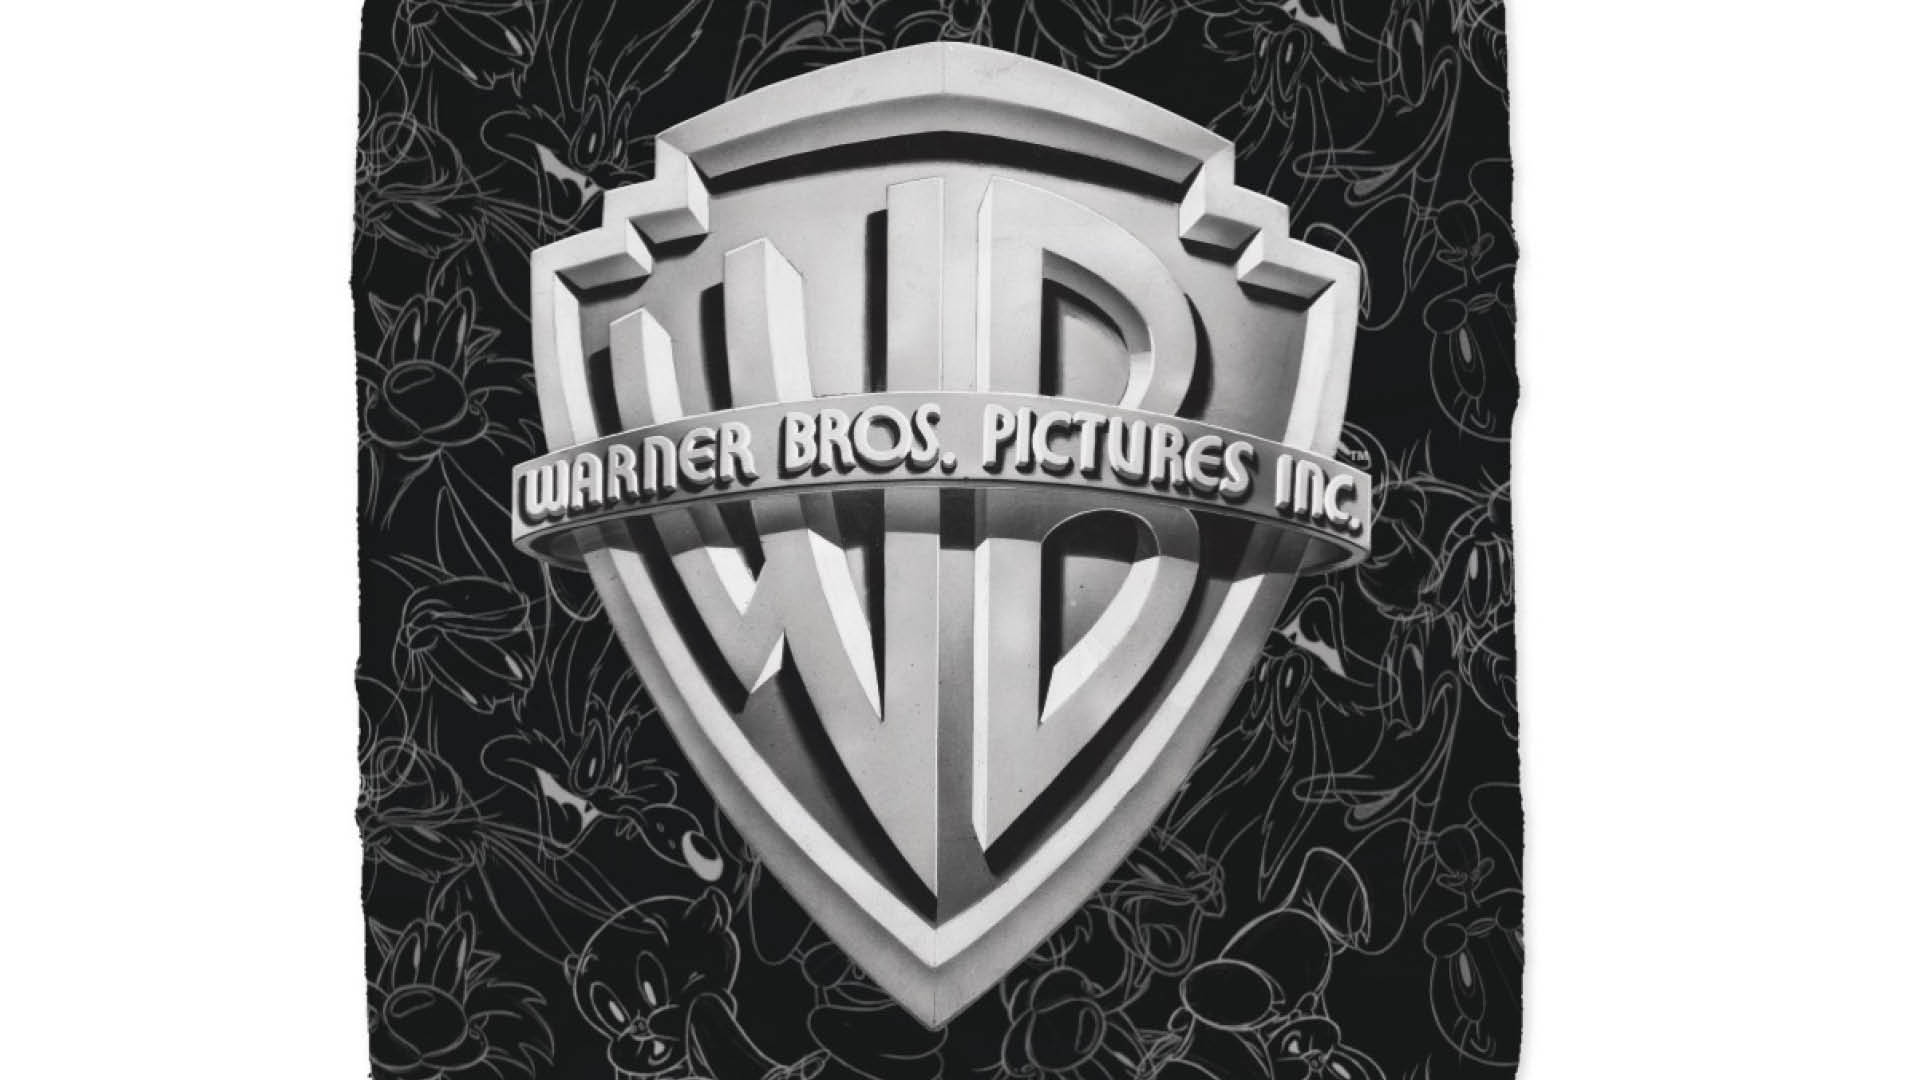 Warner Bros. 100 Years Of Fun In Products, Content And Experiences